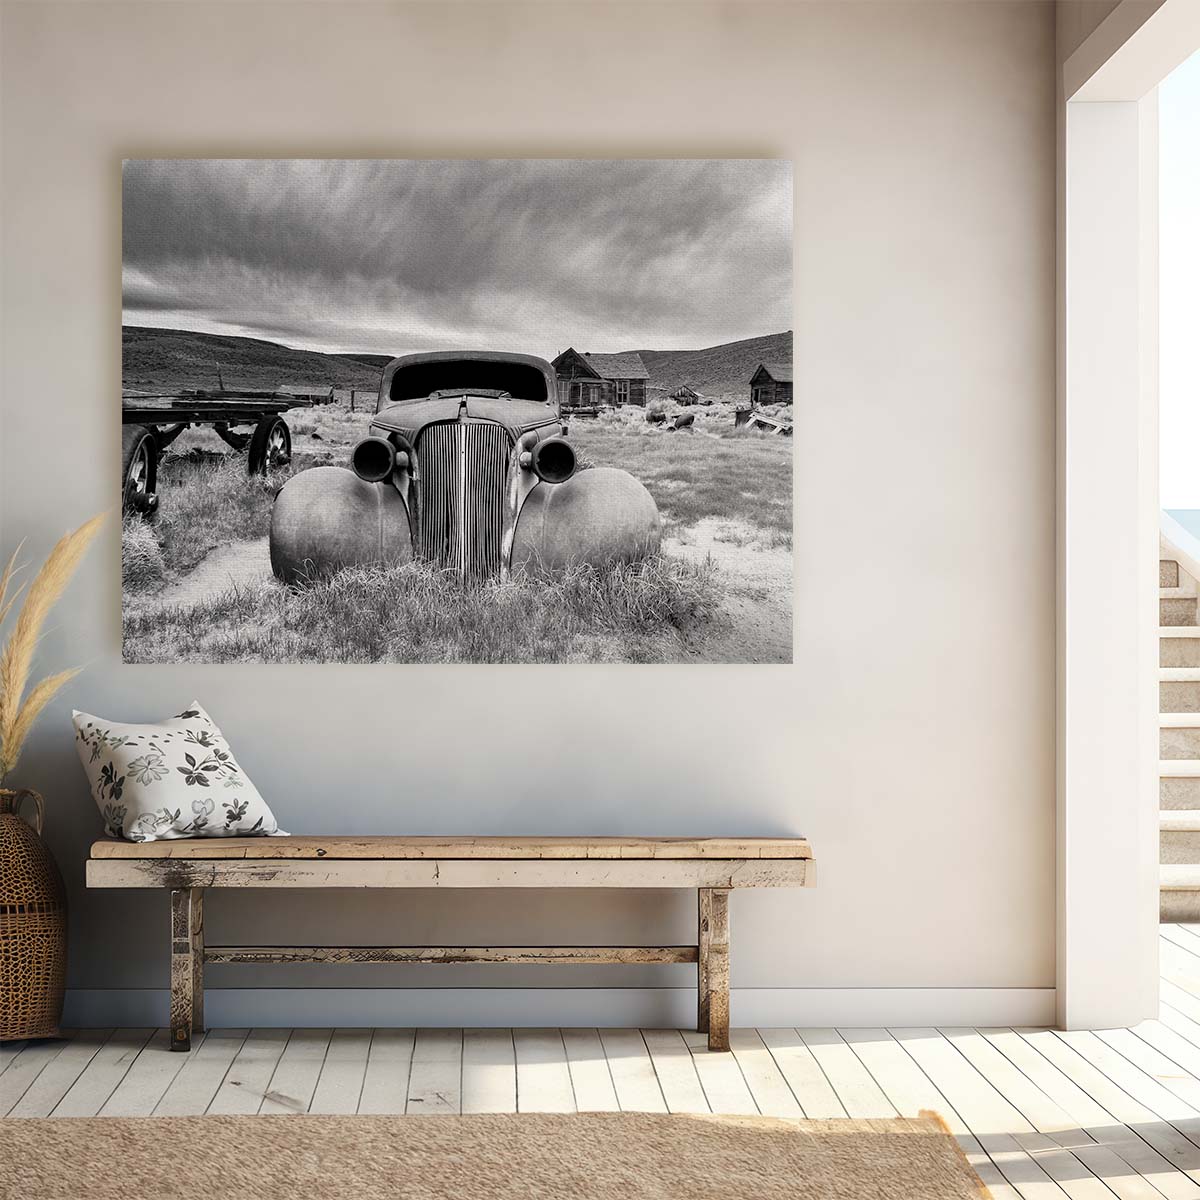 Vintage Abandoned Classic Car in Bodie, Monochrome Photography Wall Art